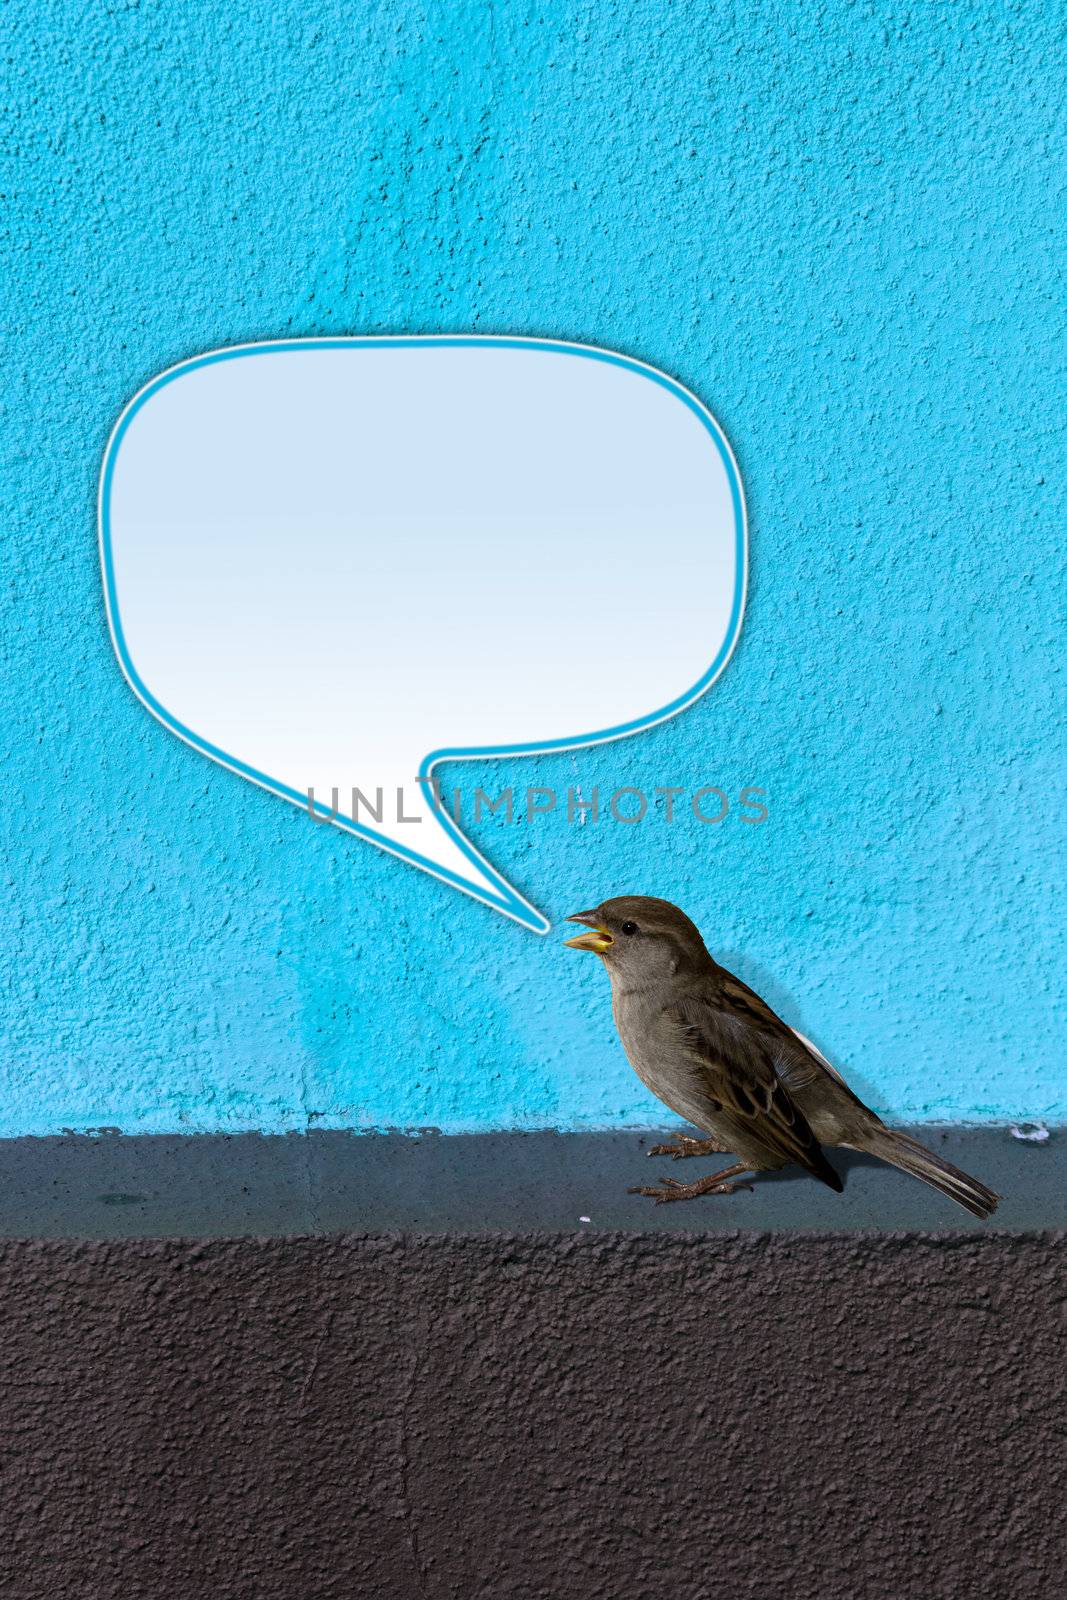 House Sparrow (Passer domesticus) on blue Wall twittering with empty text bubble.